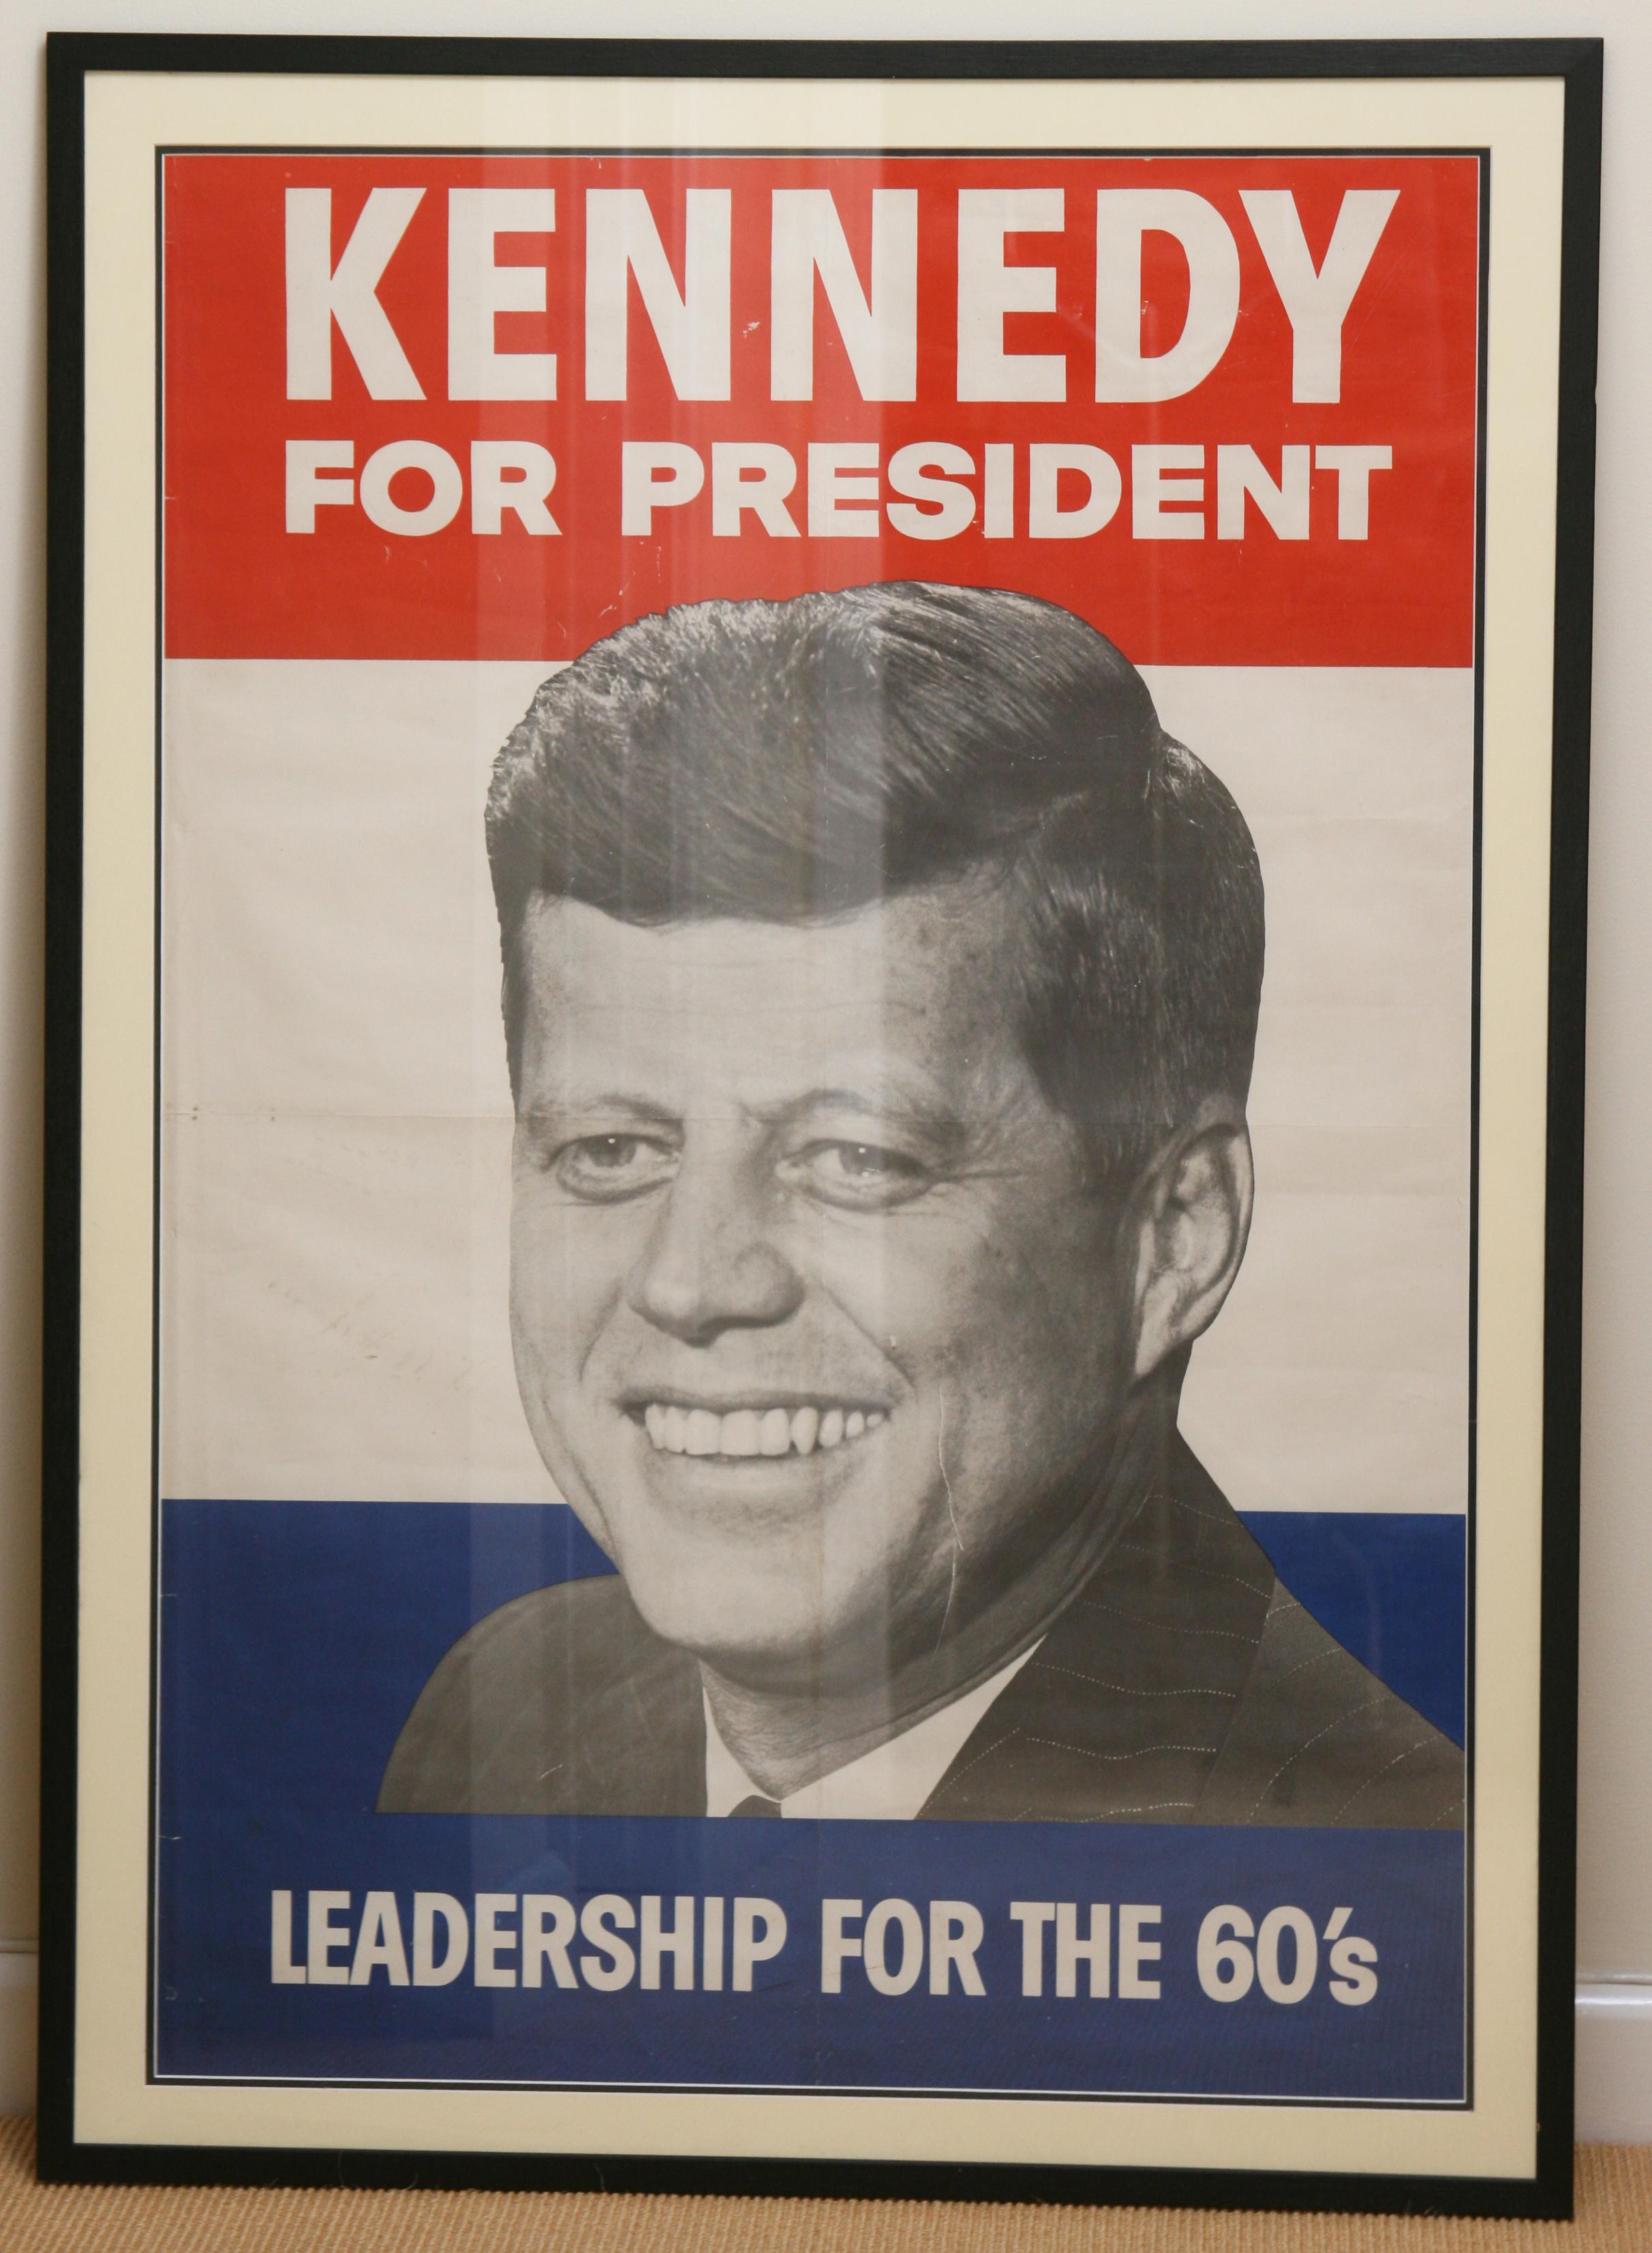 - An original poster from John F. Kennedy's 1960 presidential Campaign

- In exceptional condition, professionally mounted and framed with bold colors 

This large 27